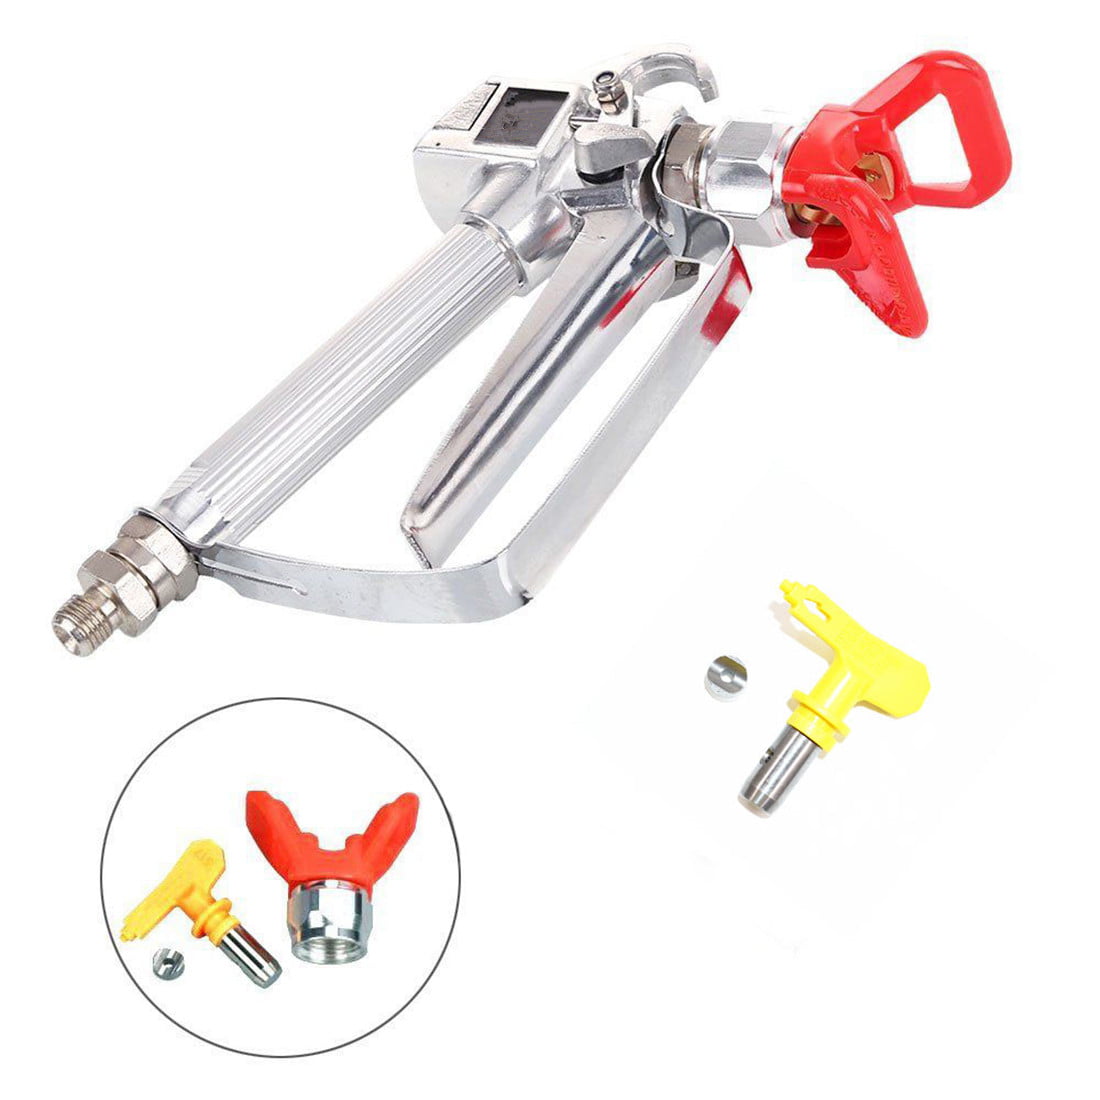 NEW 3600 PSI Airless Paint Spray Gun 517 Tip Tip Guard For Sprayers US 